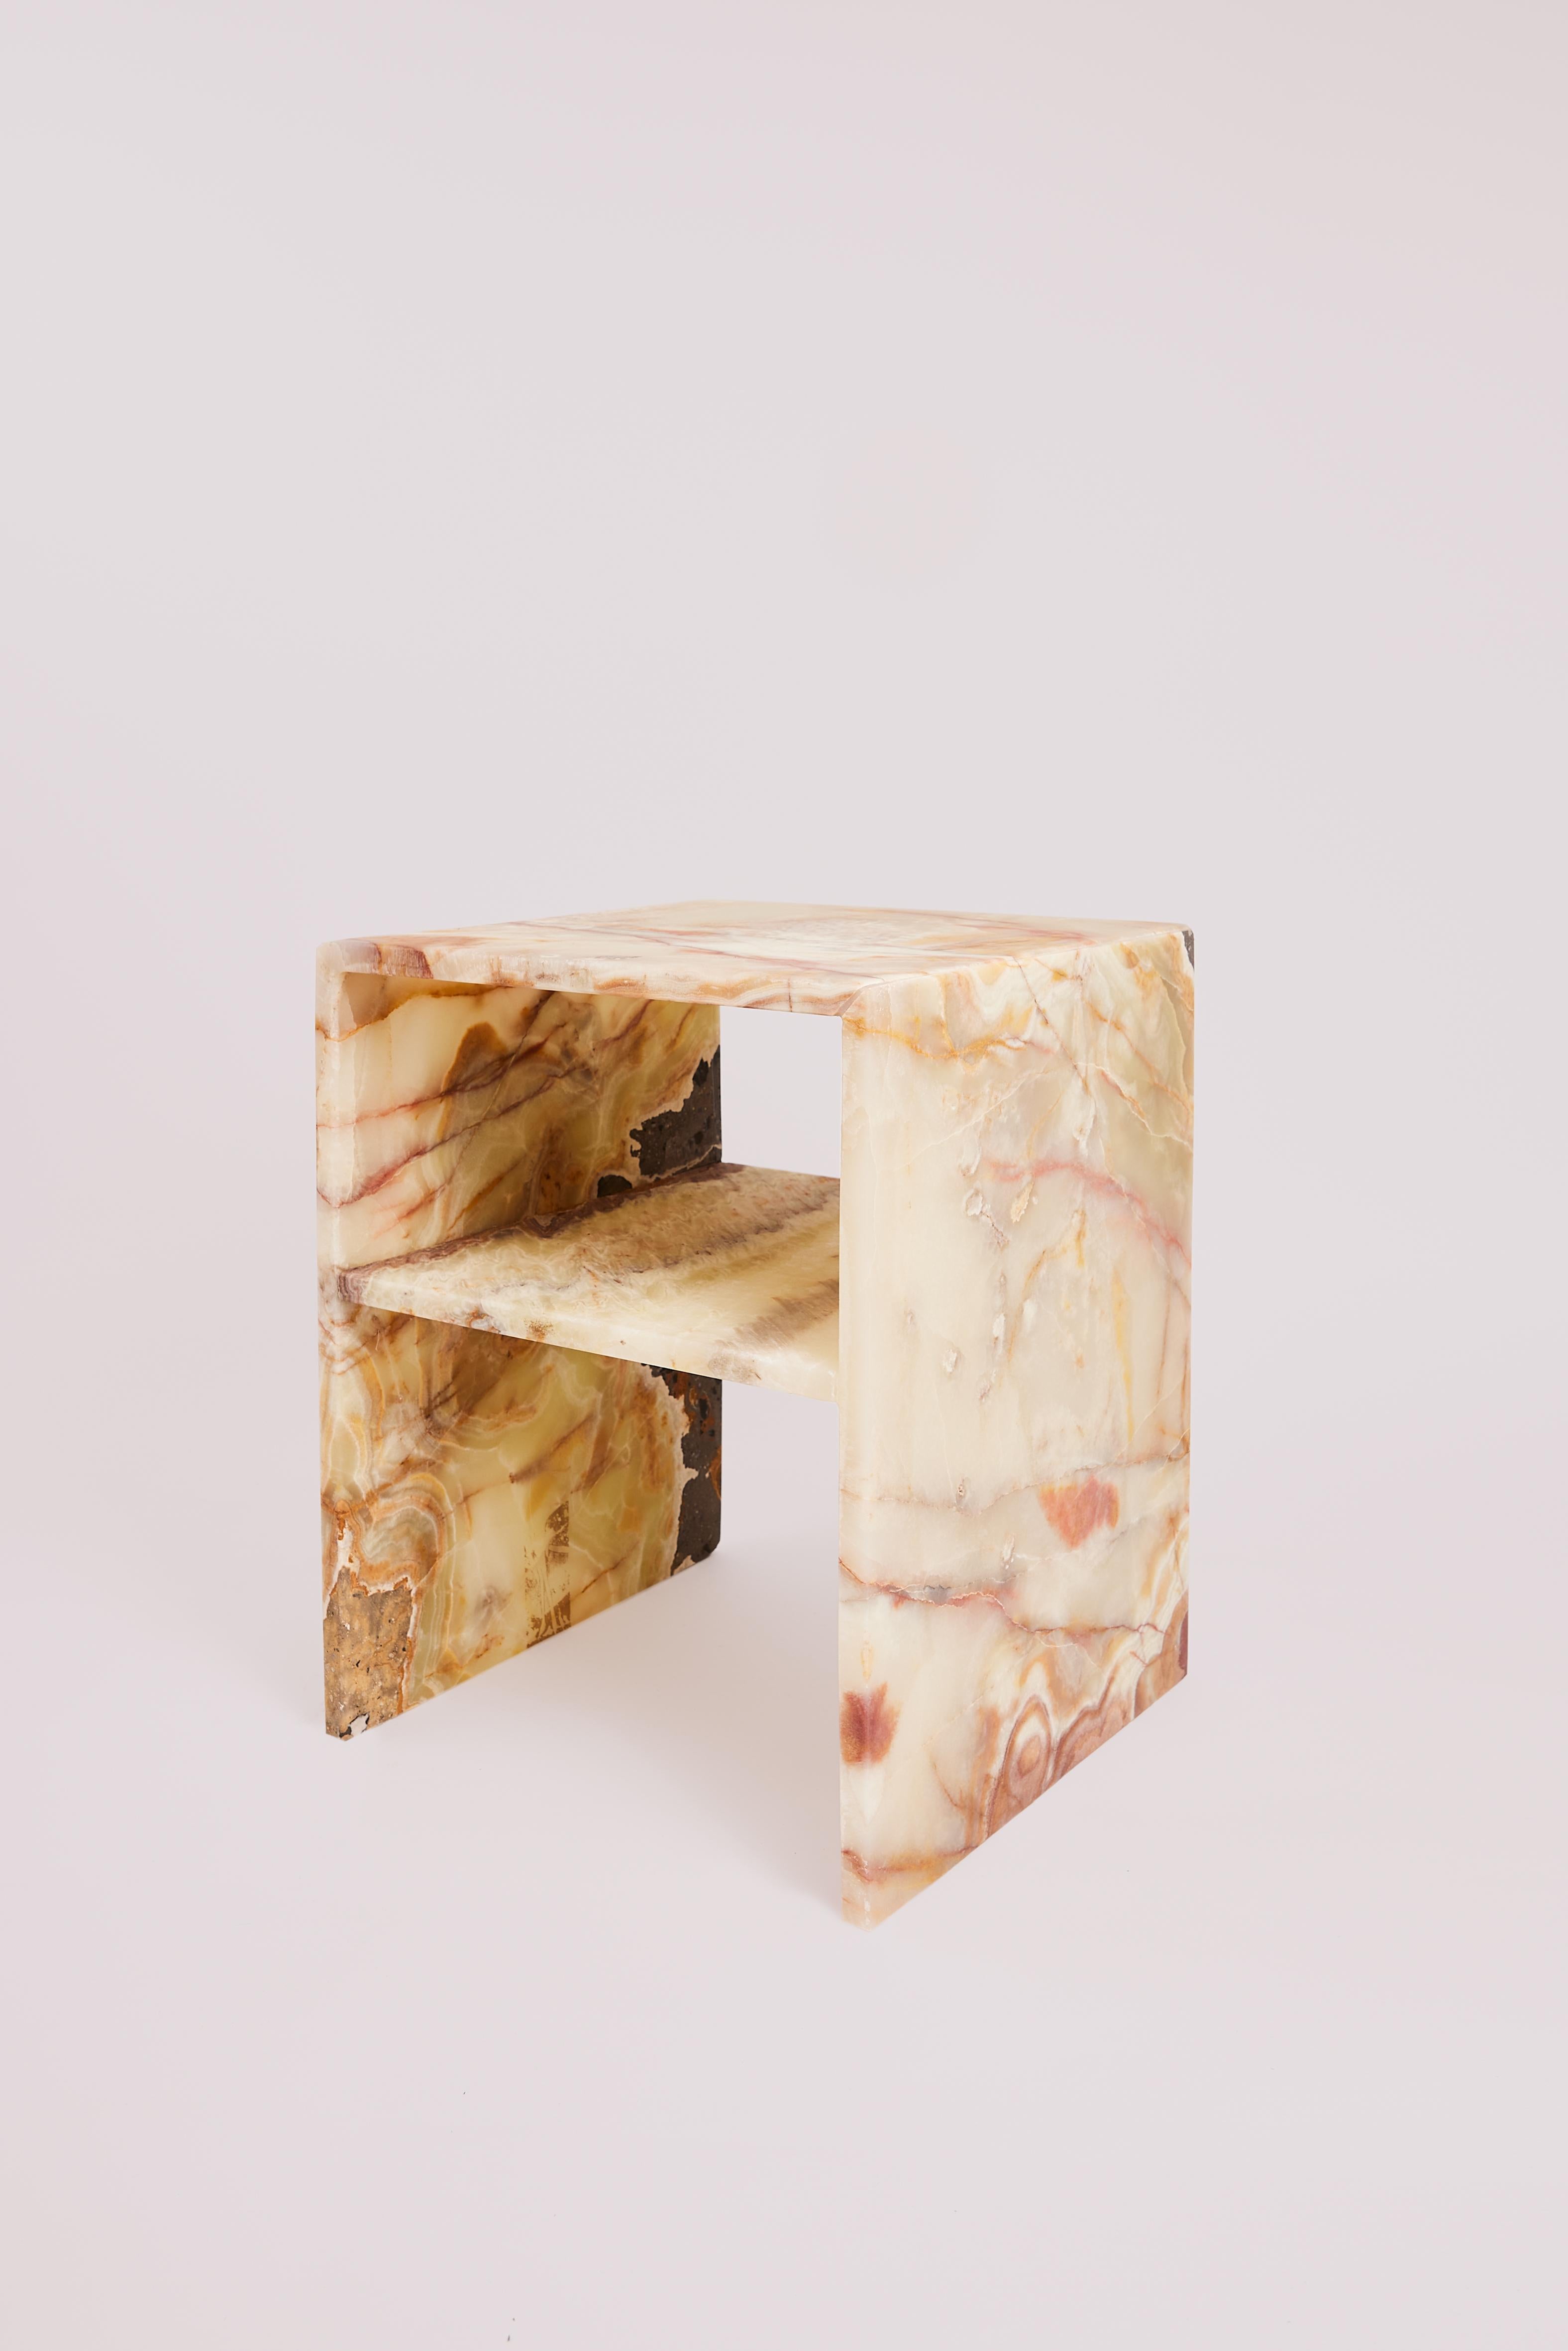 Green Onyx Rosa Bedside Table by Studio Gaia Paris
Dimensions: W 40 x D 40 x H 50 cm
Materials: Green Onyx

The Rosa table is a bedside table, a side table or an end table.

It is made from exotic onyx known for its beauty and color variations.
Each